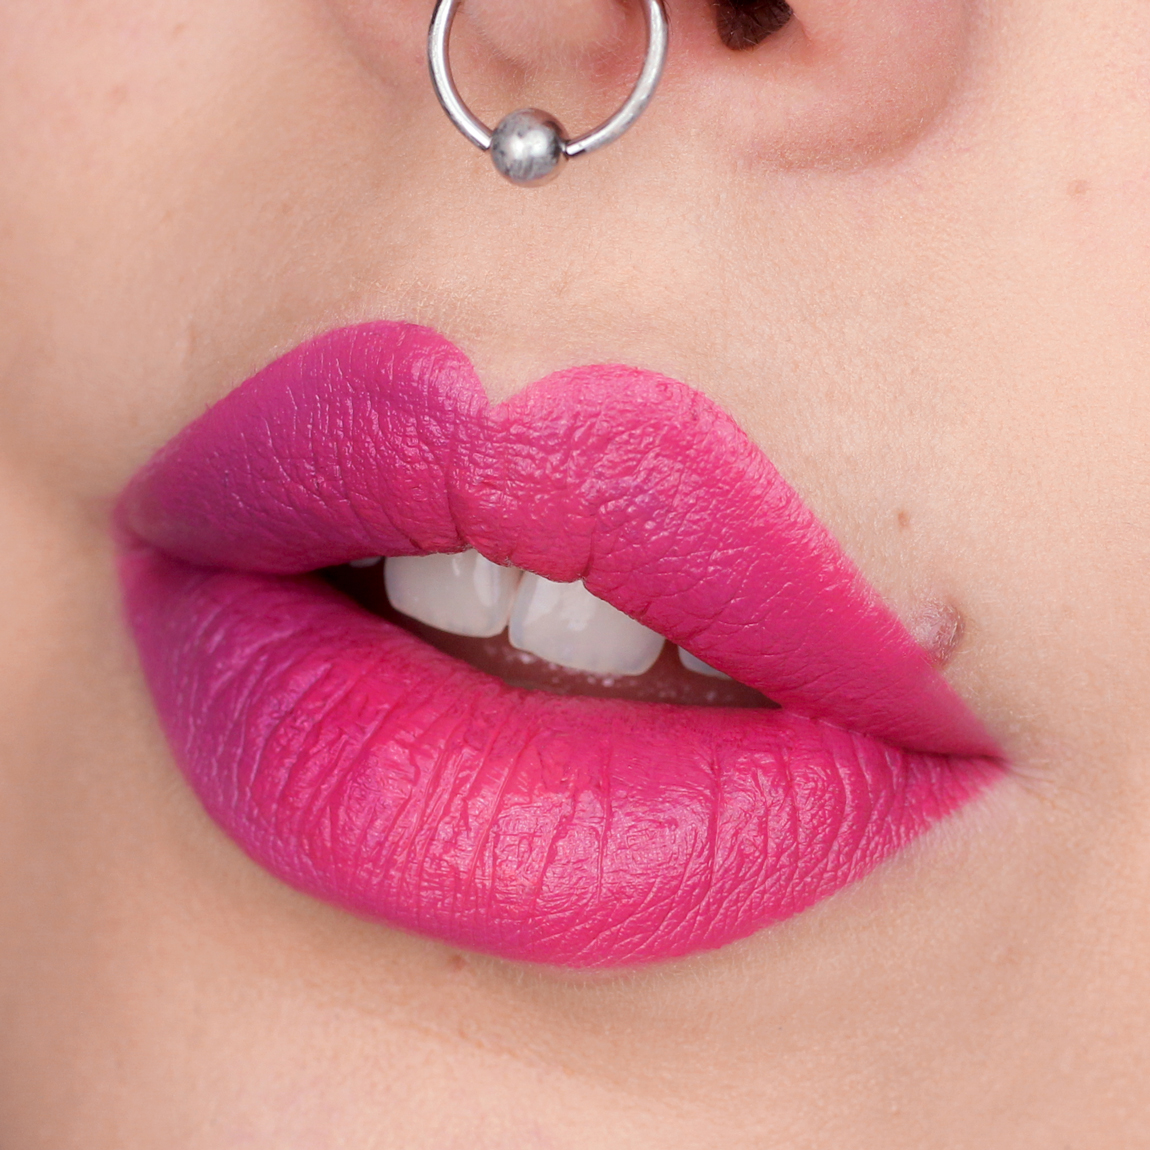 Lips to heart with fuchsia or deep pink lipstick!